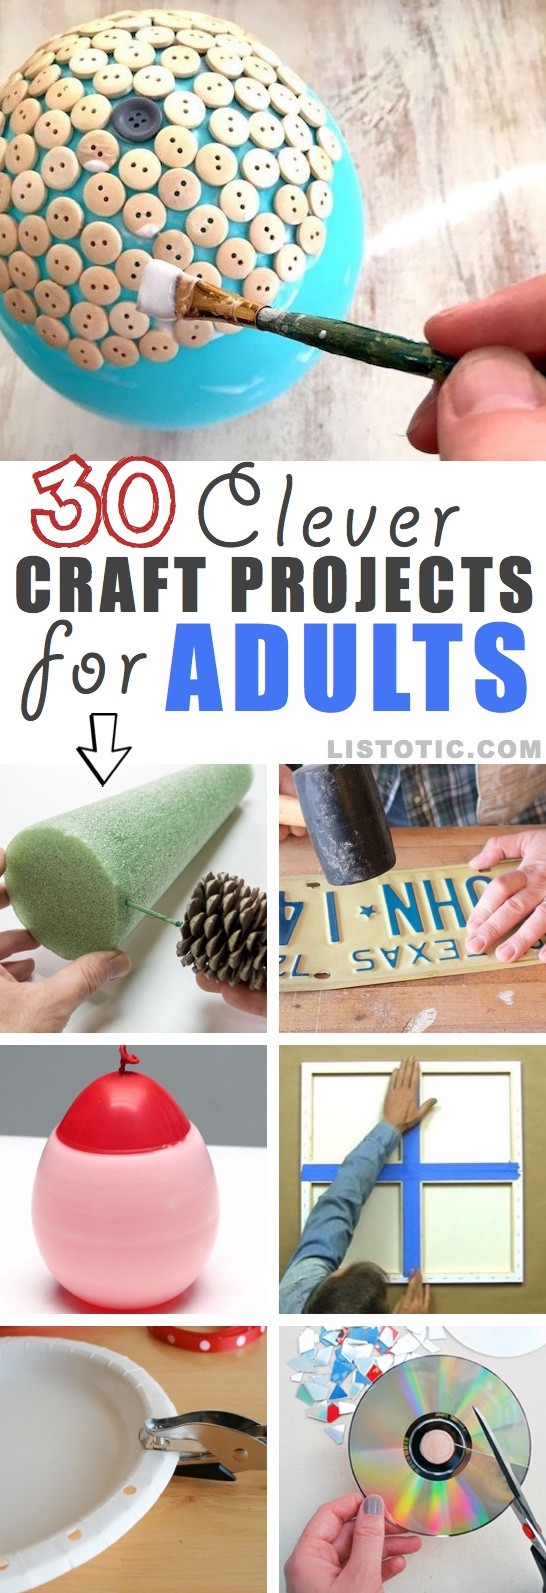 Easy Crafting Ideas For Adults
 Easy DIY Craft Ideas That Will Spark Your Creativity for